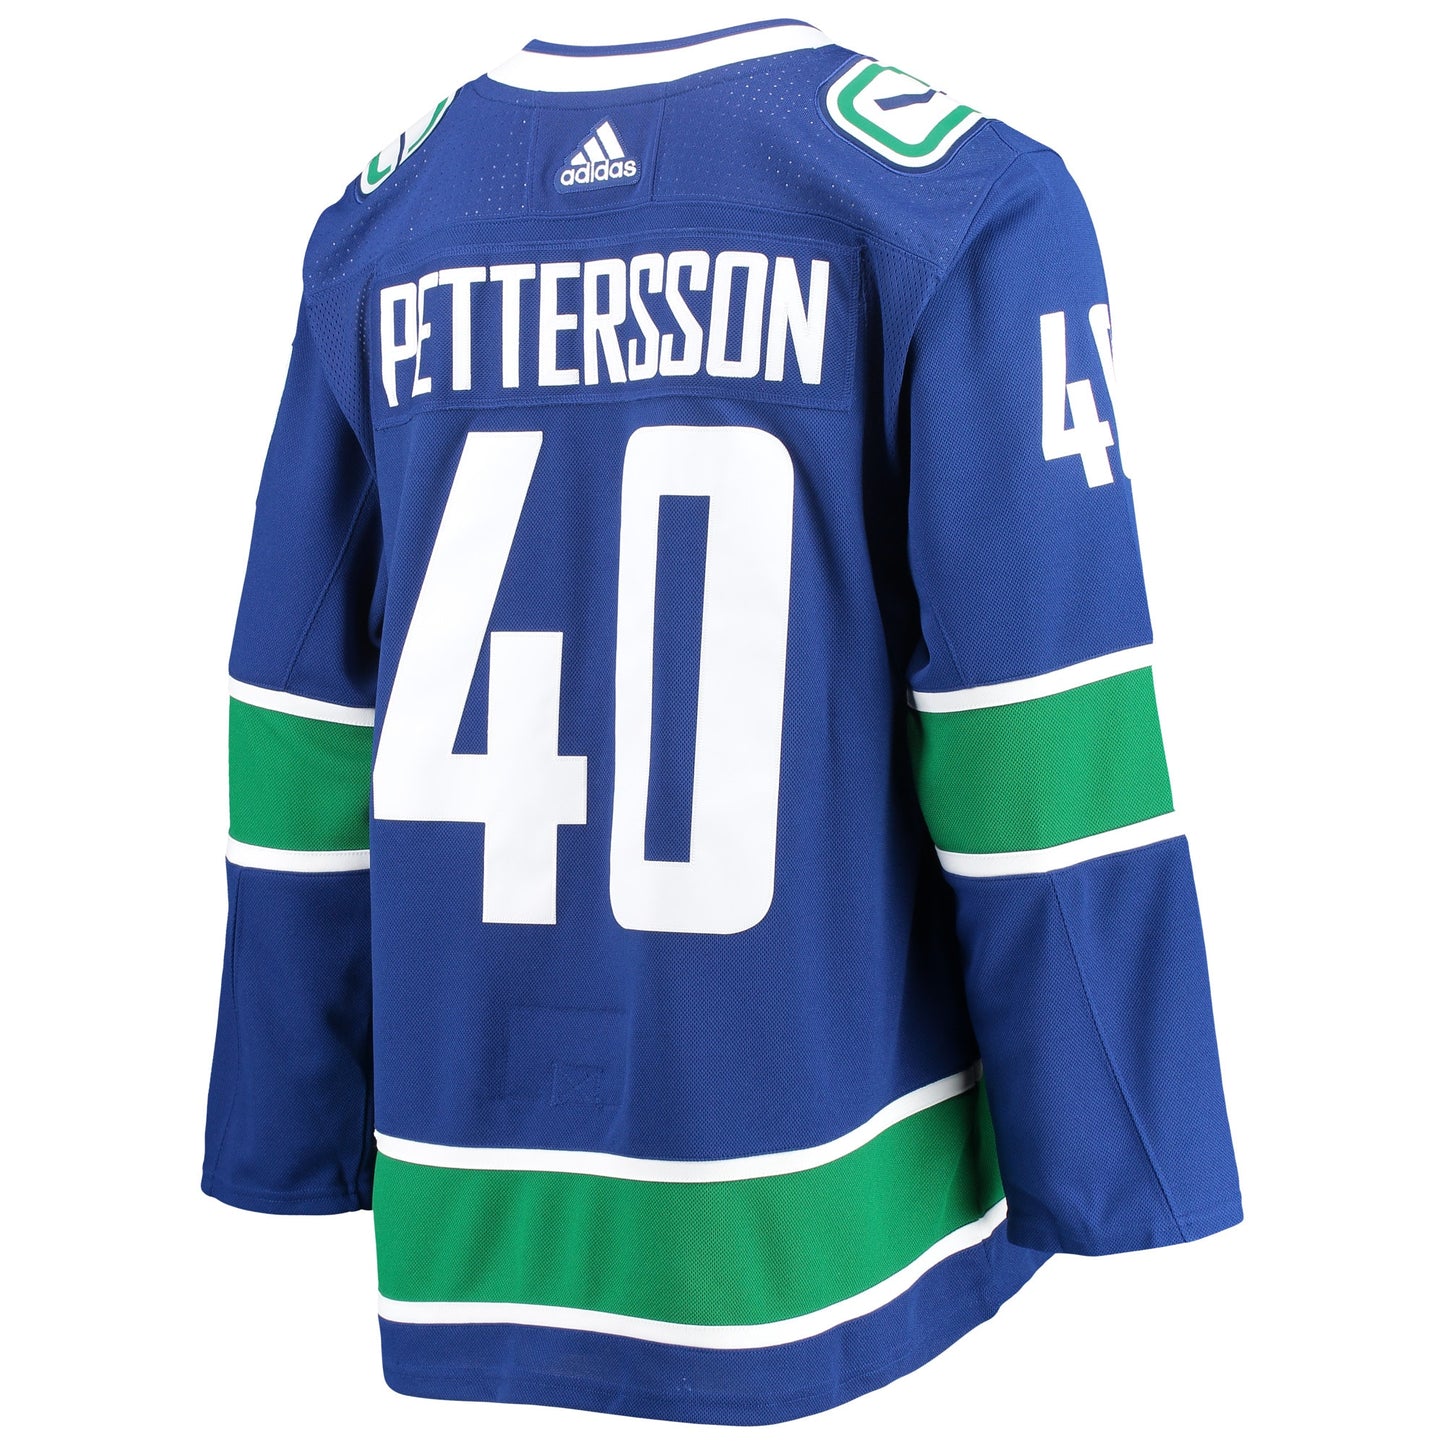 Elias Pettersson Vancouver Canucks adidas 2020/21 Authentic Home Player Jersey - Blue